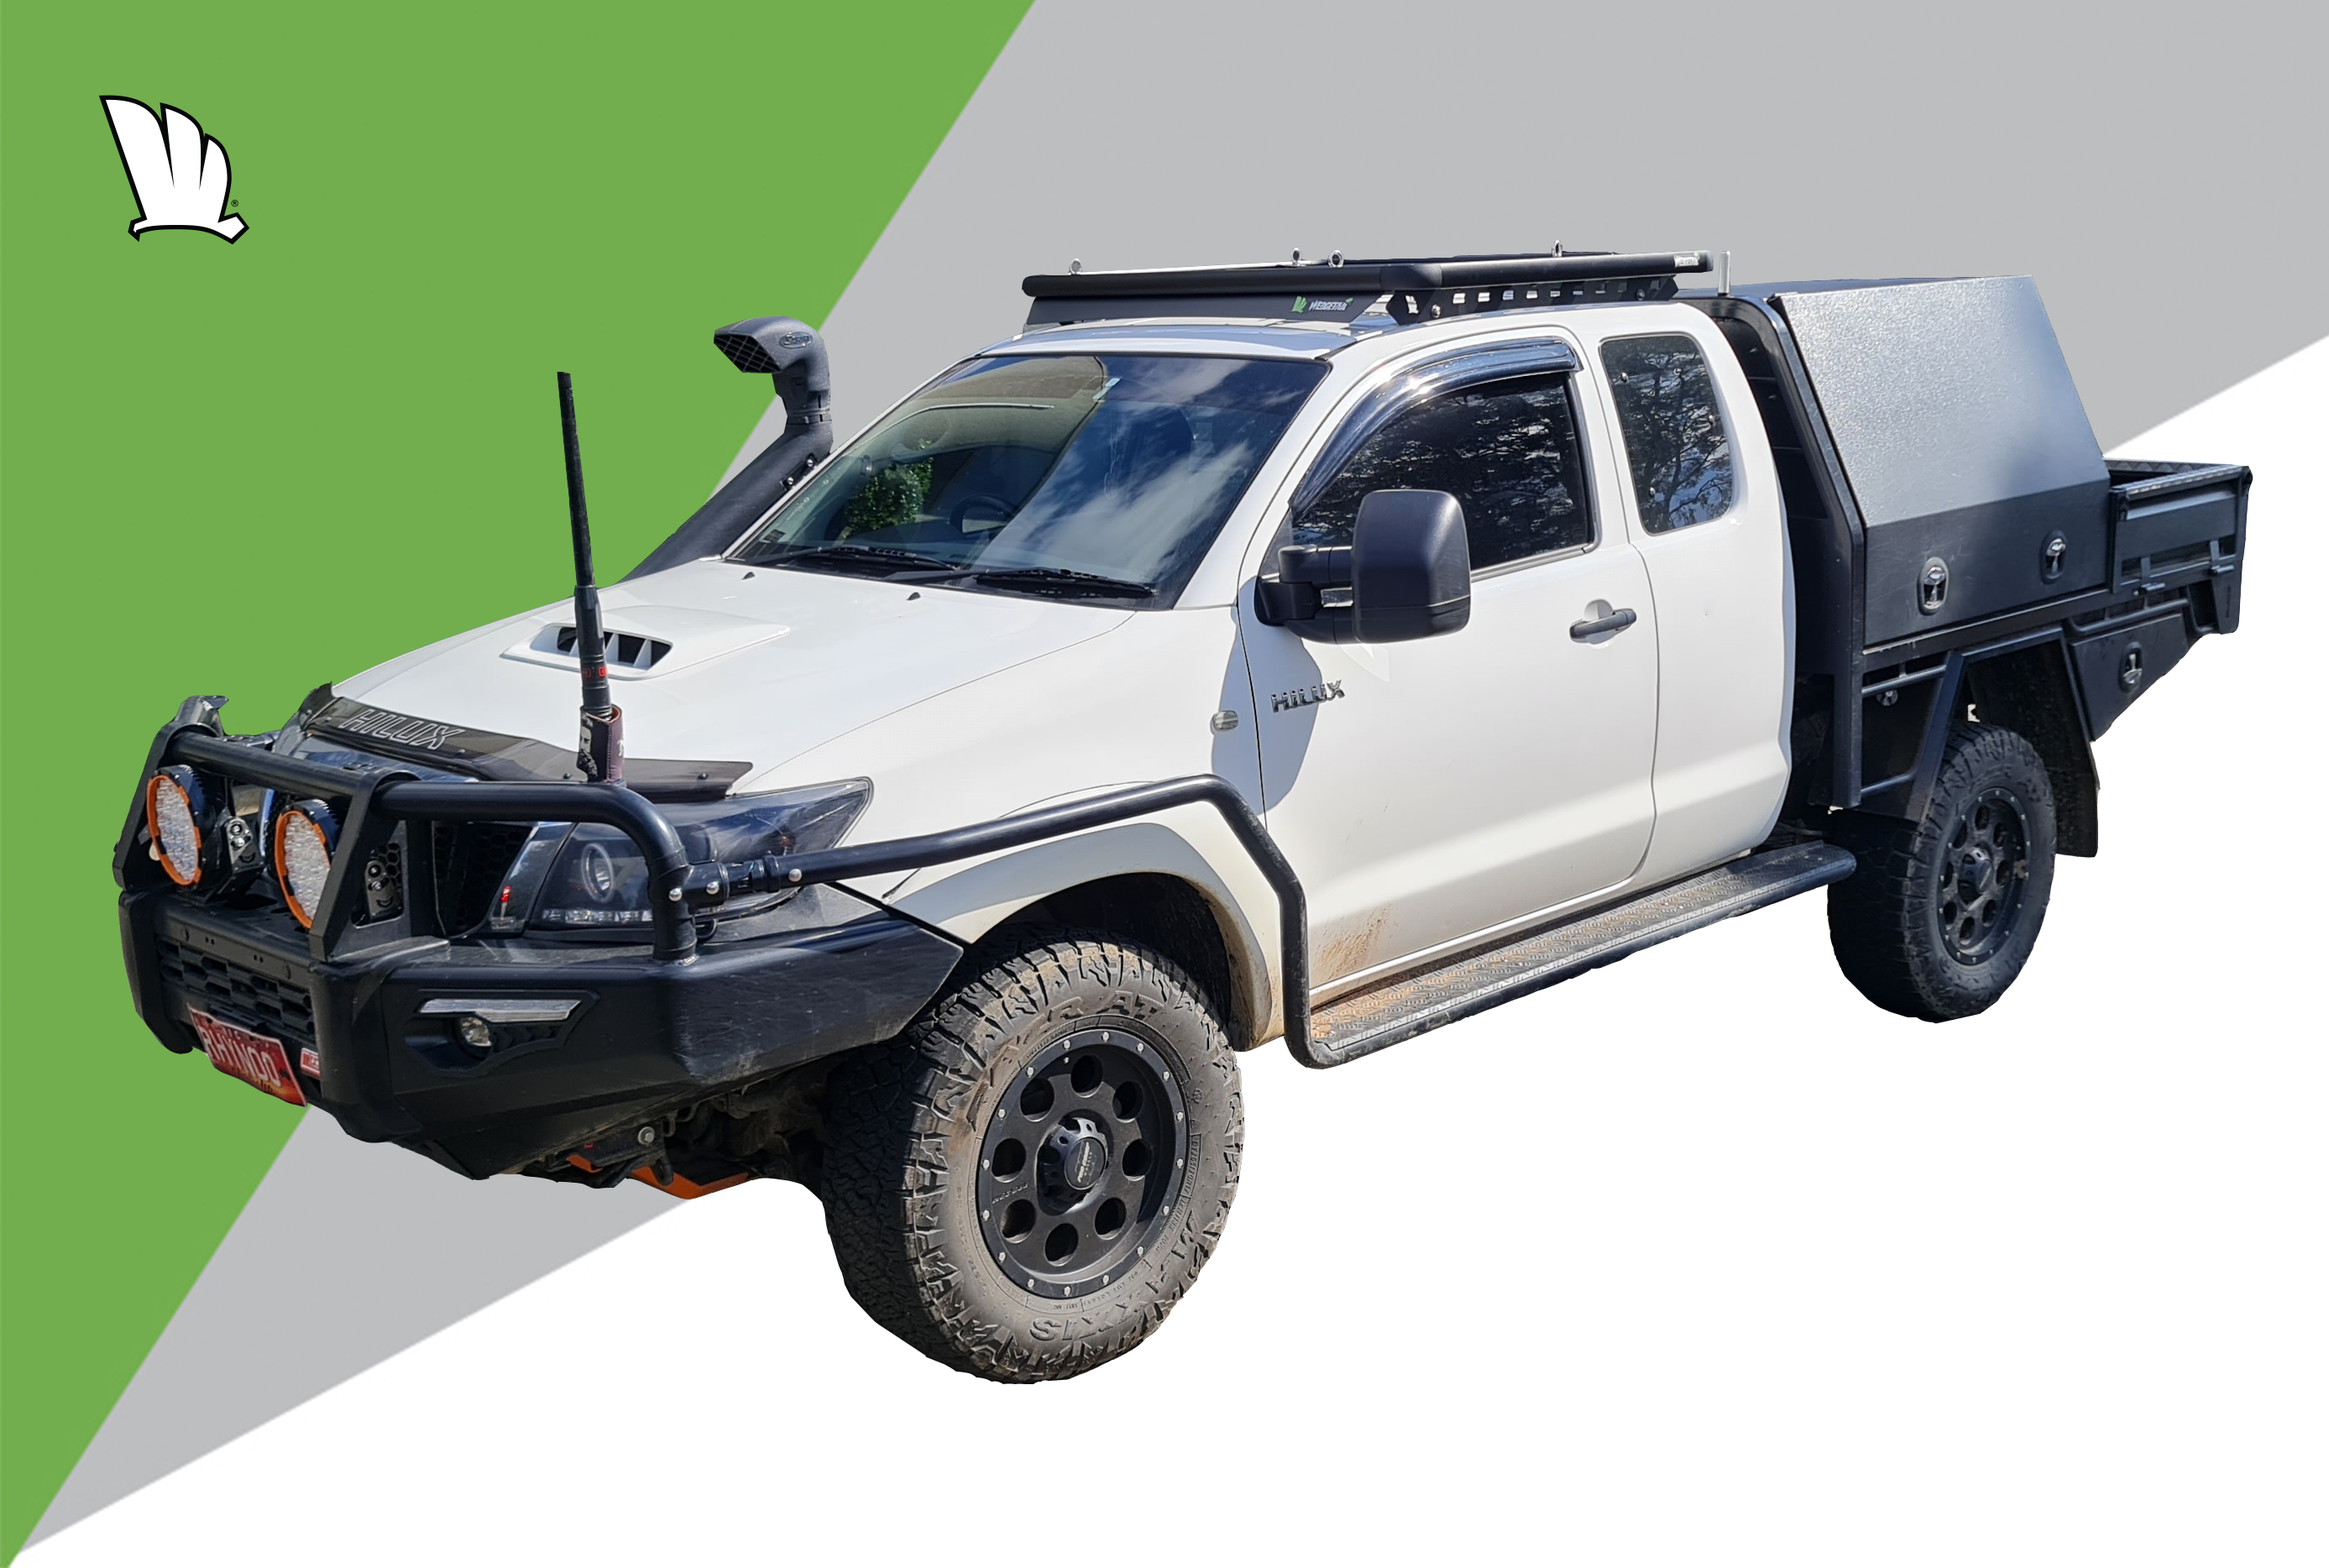 Modified 2015 HiLux with a Wedgetail platform roof rack installed on the roof of the dual cabin.